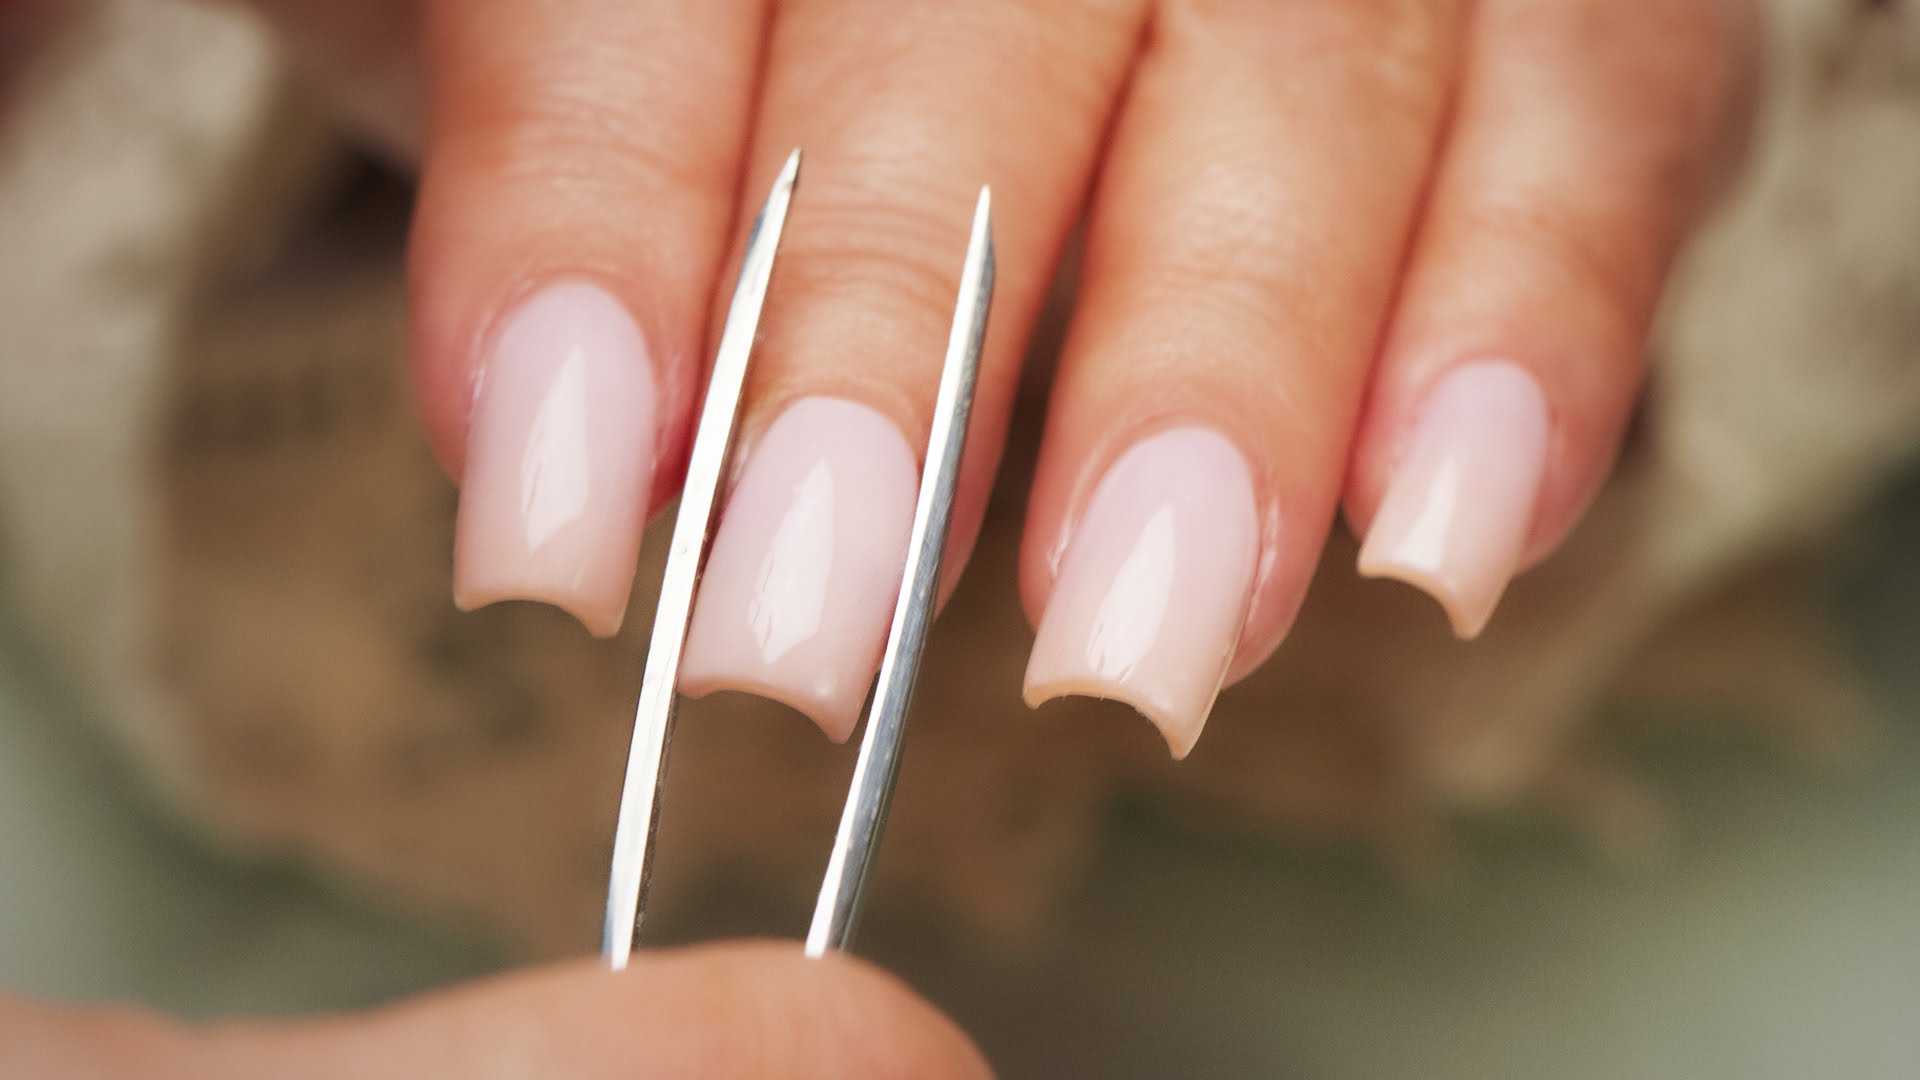 Step by step square shapes nails